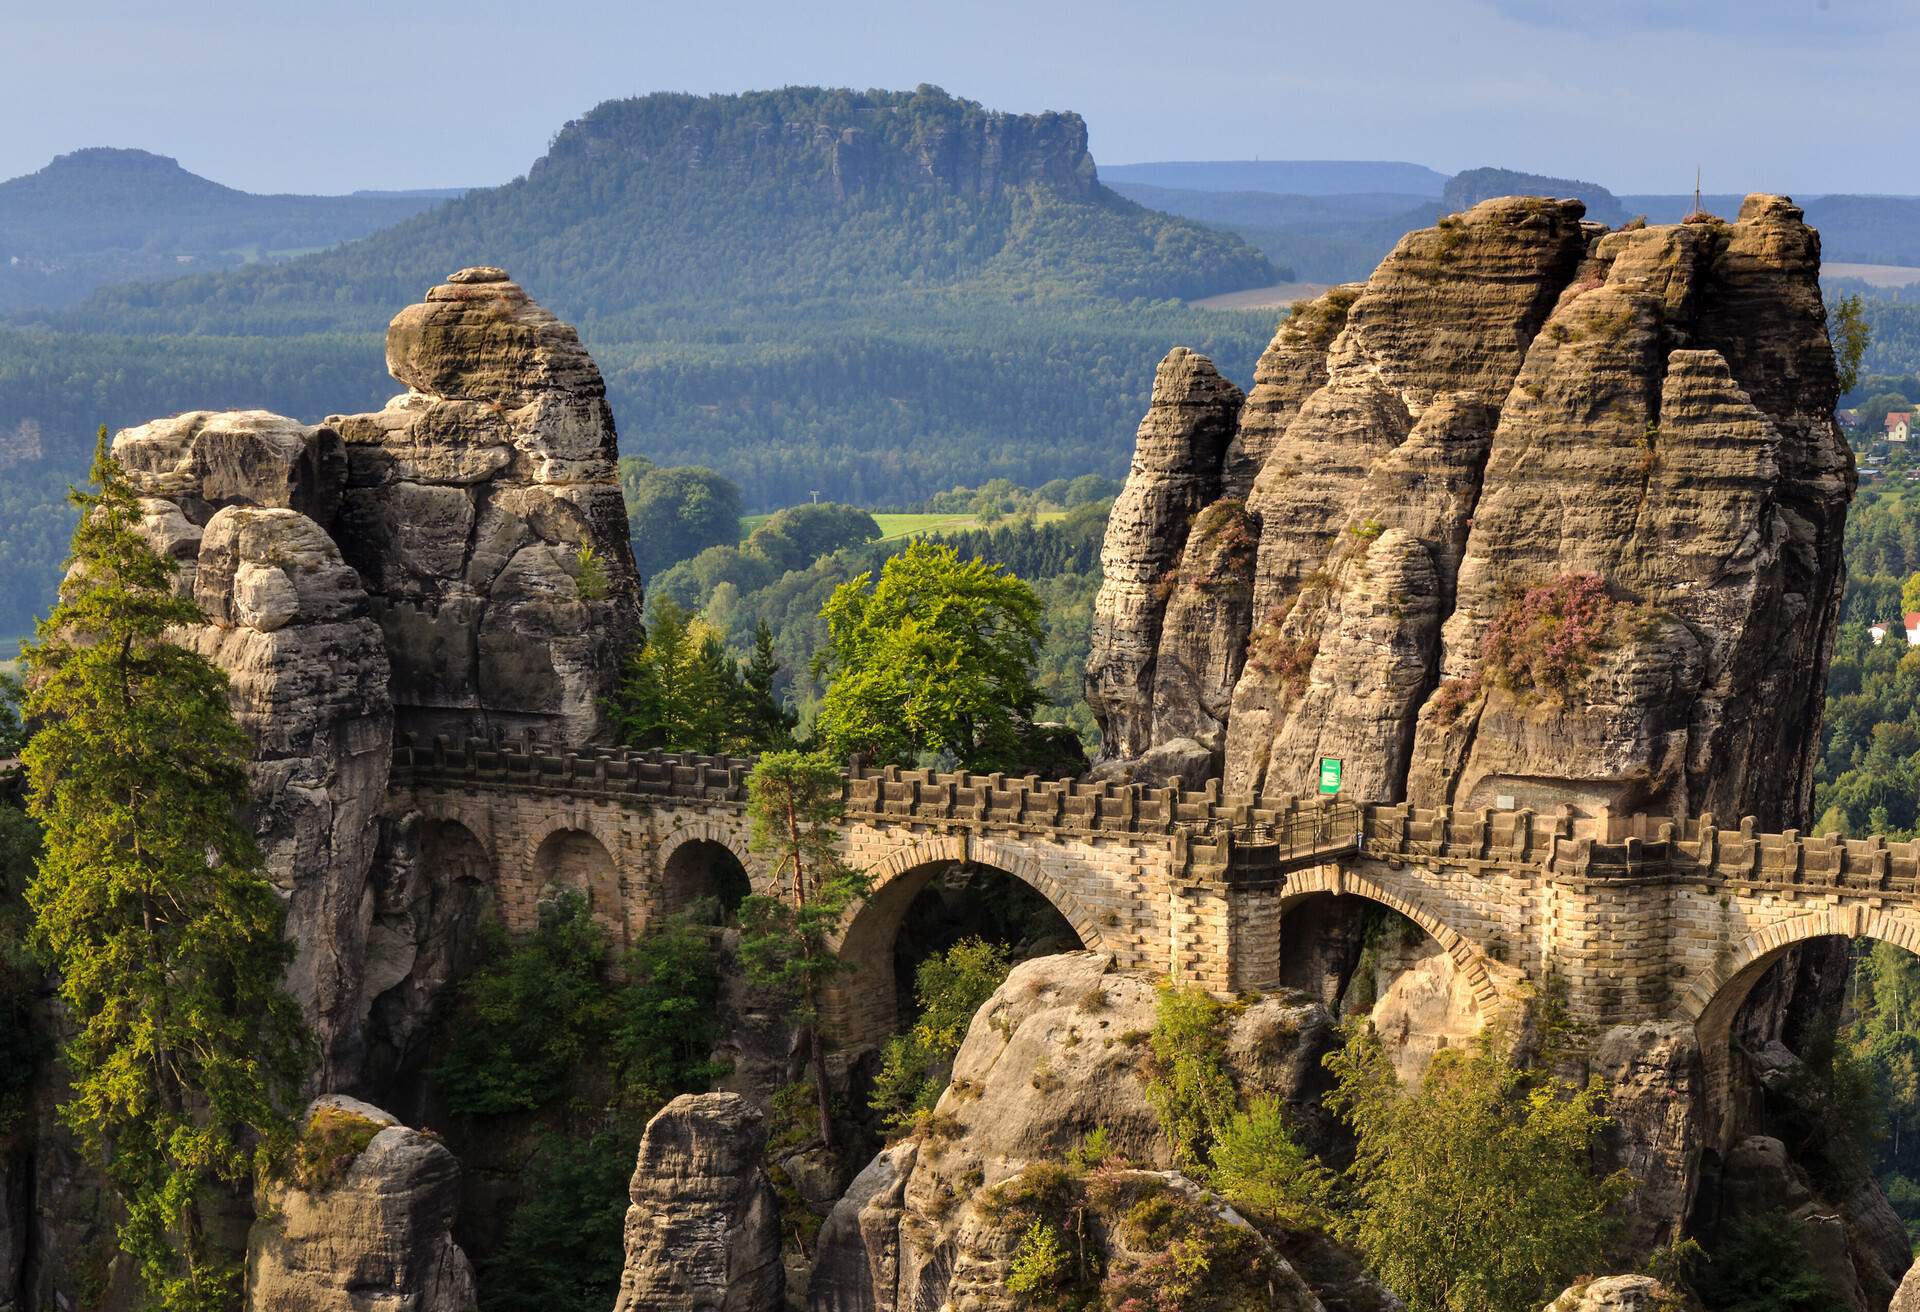 Famous Bastion Bridge in the Saxonian Swiss in Germany, shot on a warm summer morning after sunrise. Amazing Landmark of Saxonia. Impressive Sandstone Rock Formations. Bridge leading to a former medieval castle near Dresden